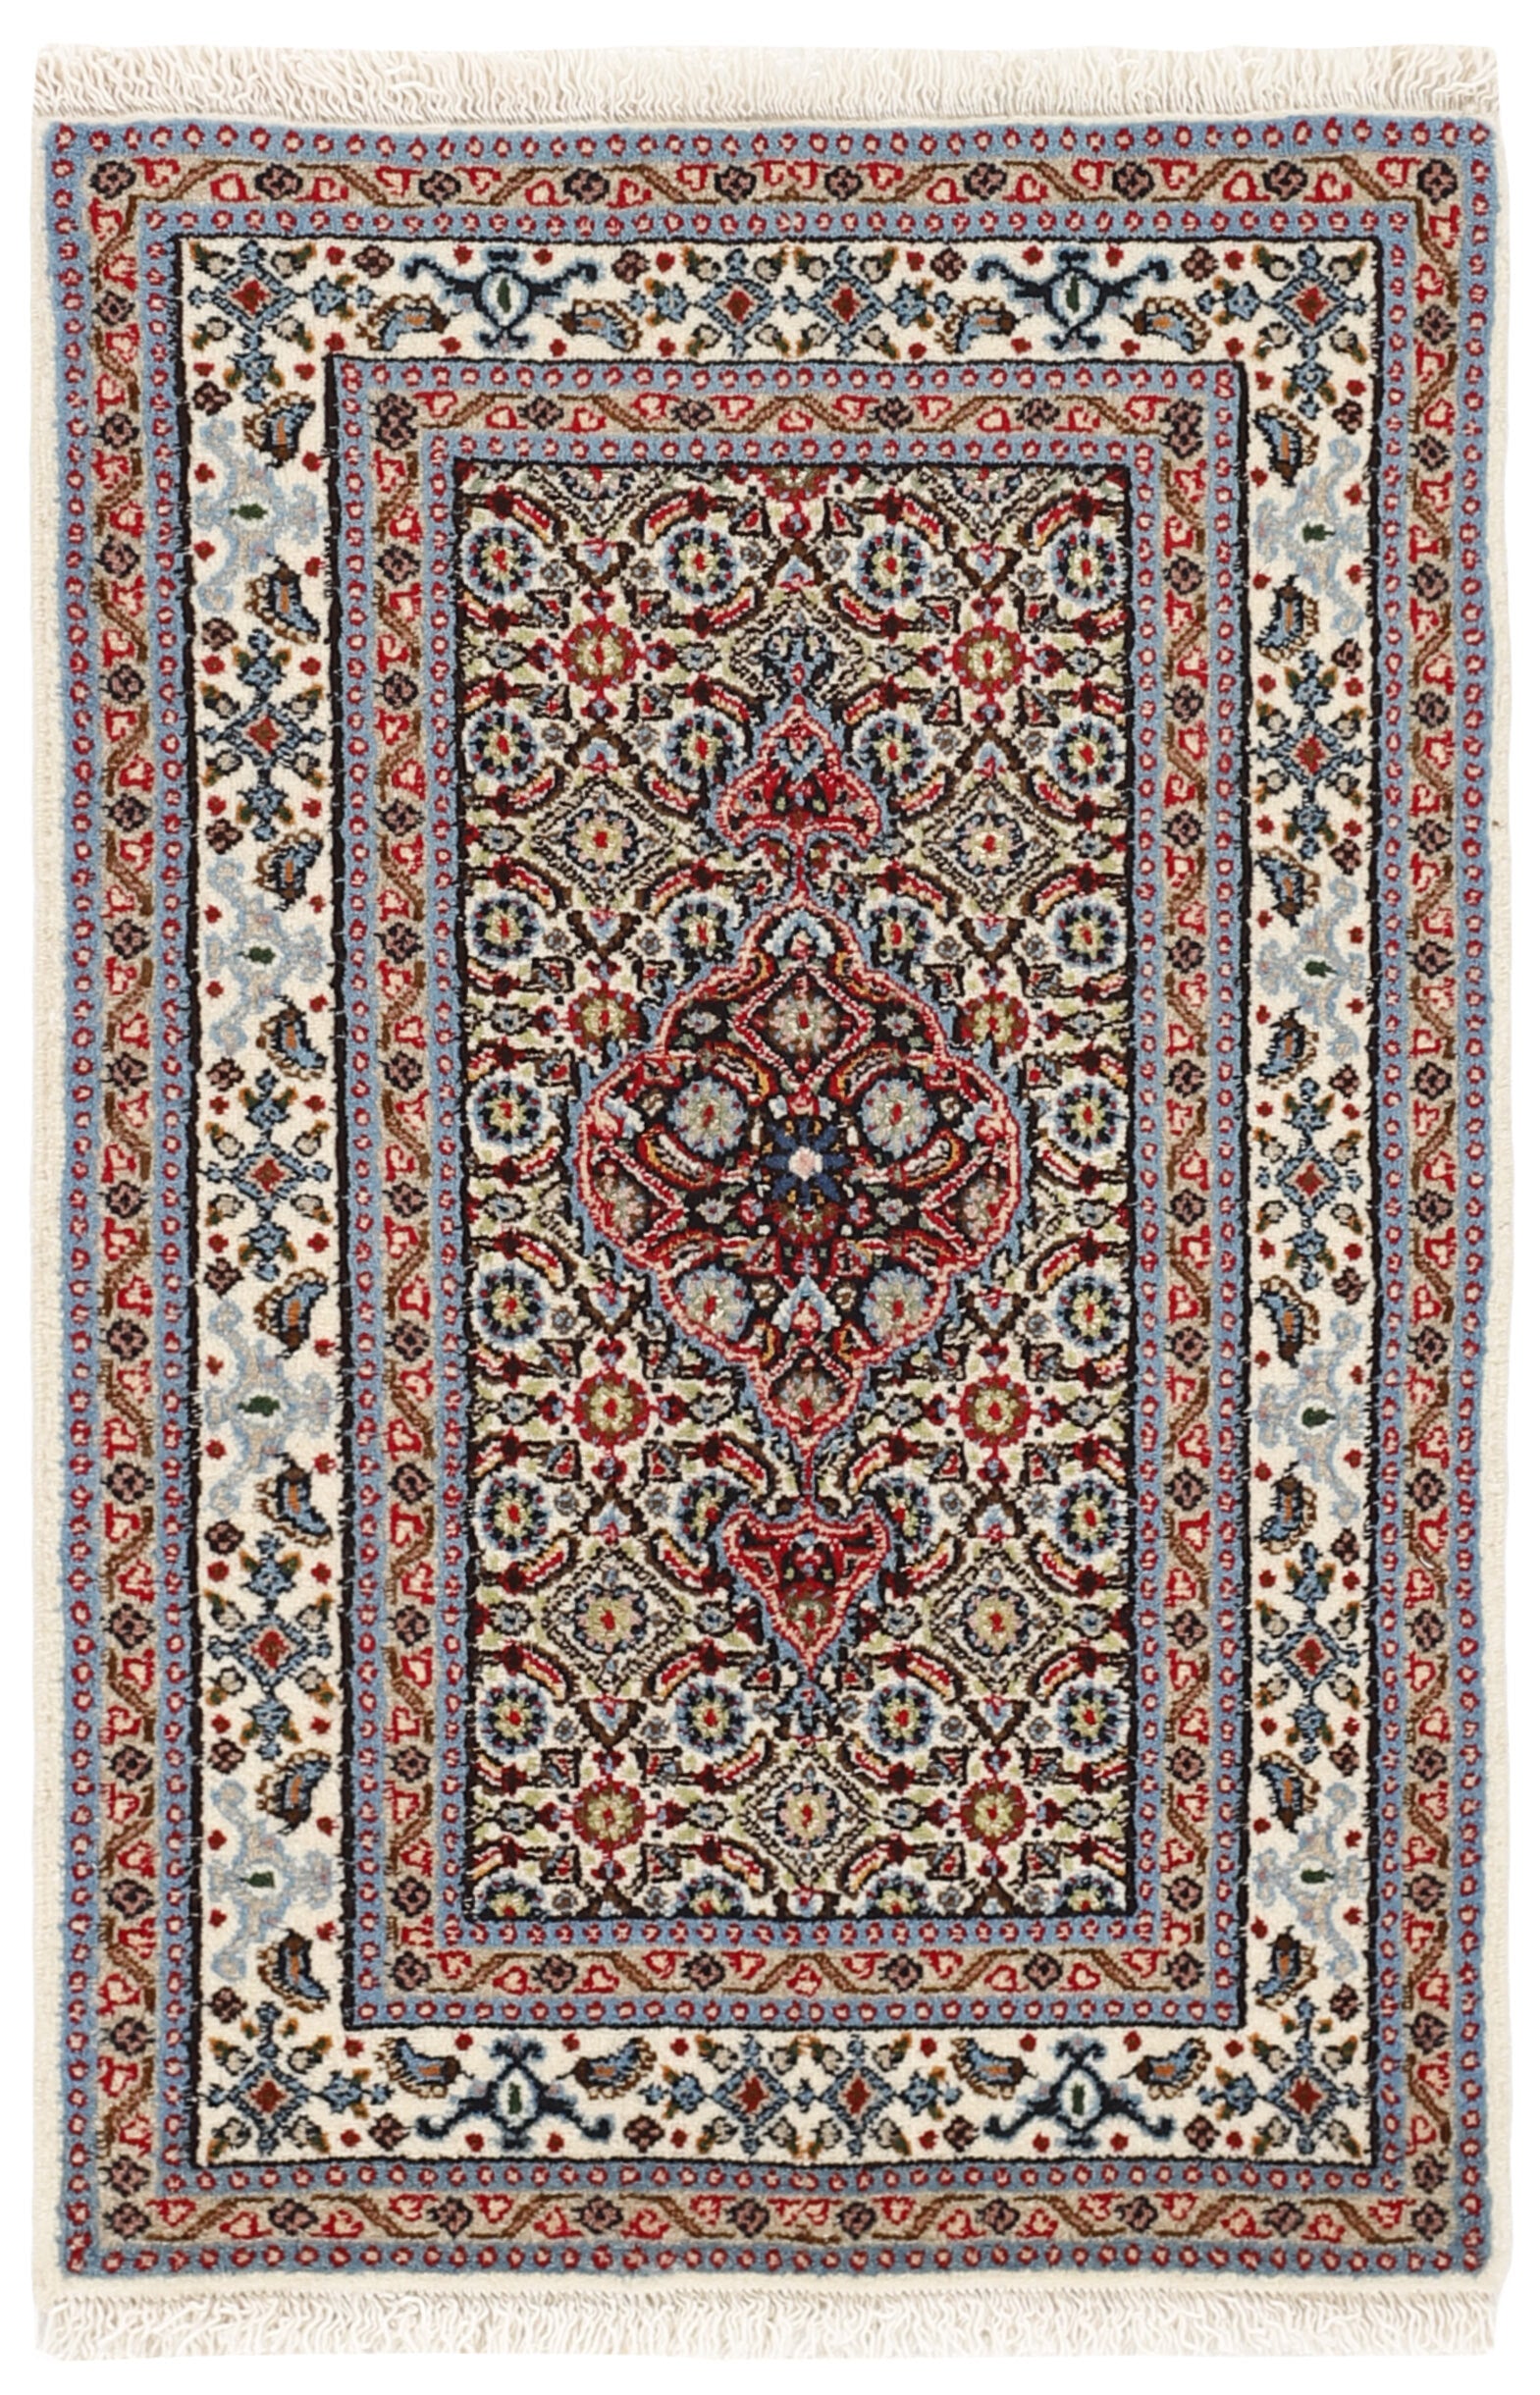 authentic persian rug with traditional floral pattern in red, pink, yellow, blue, green, cream, beige, brown and black